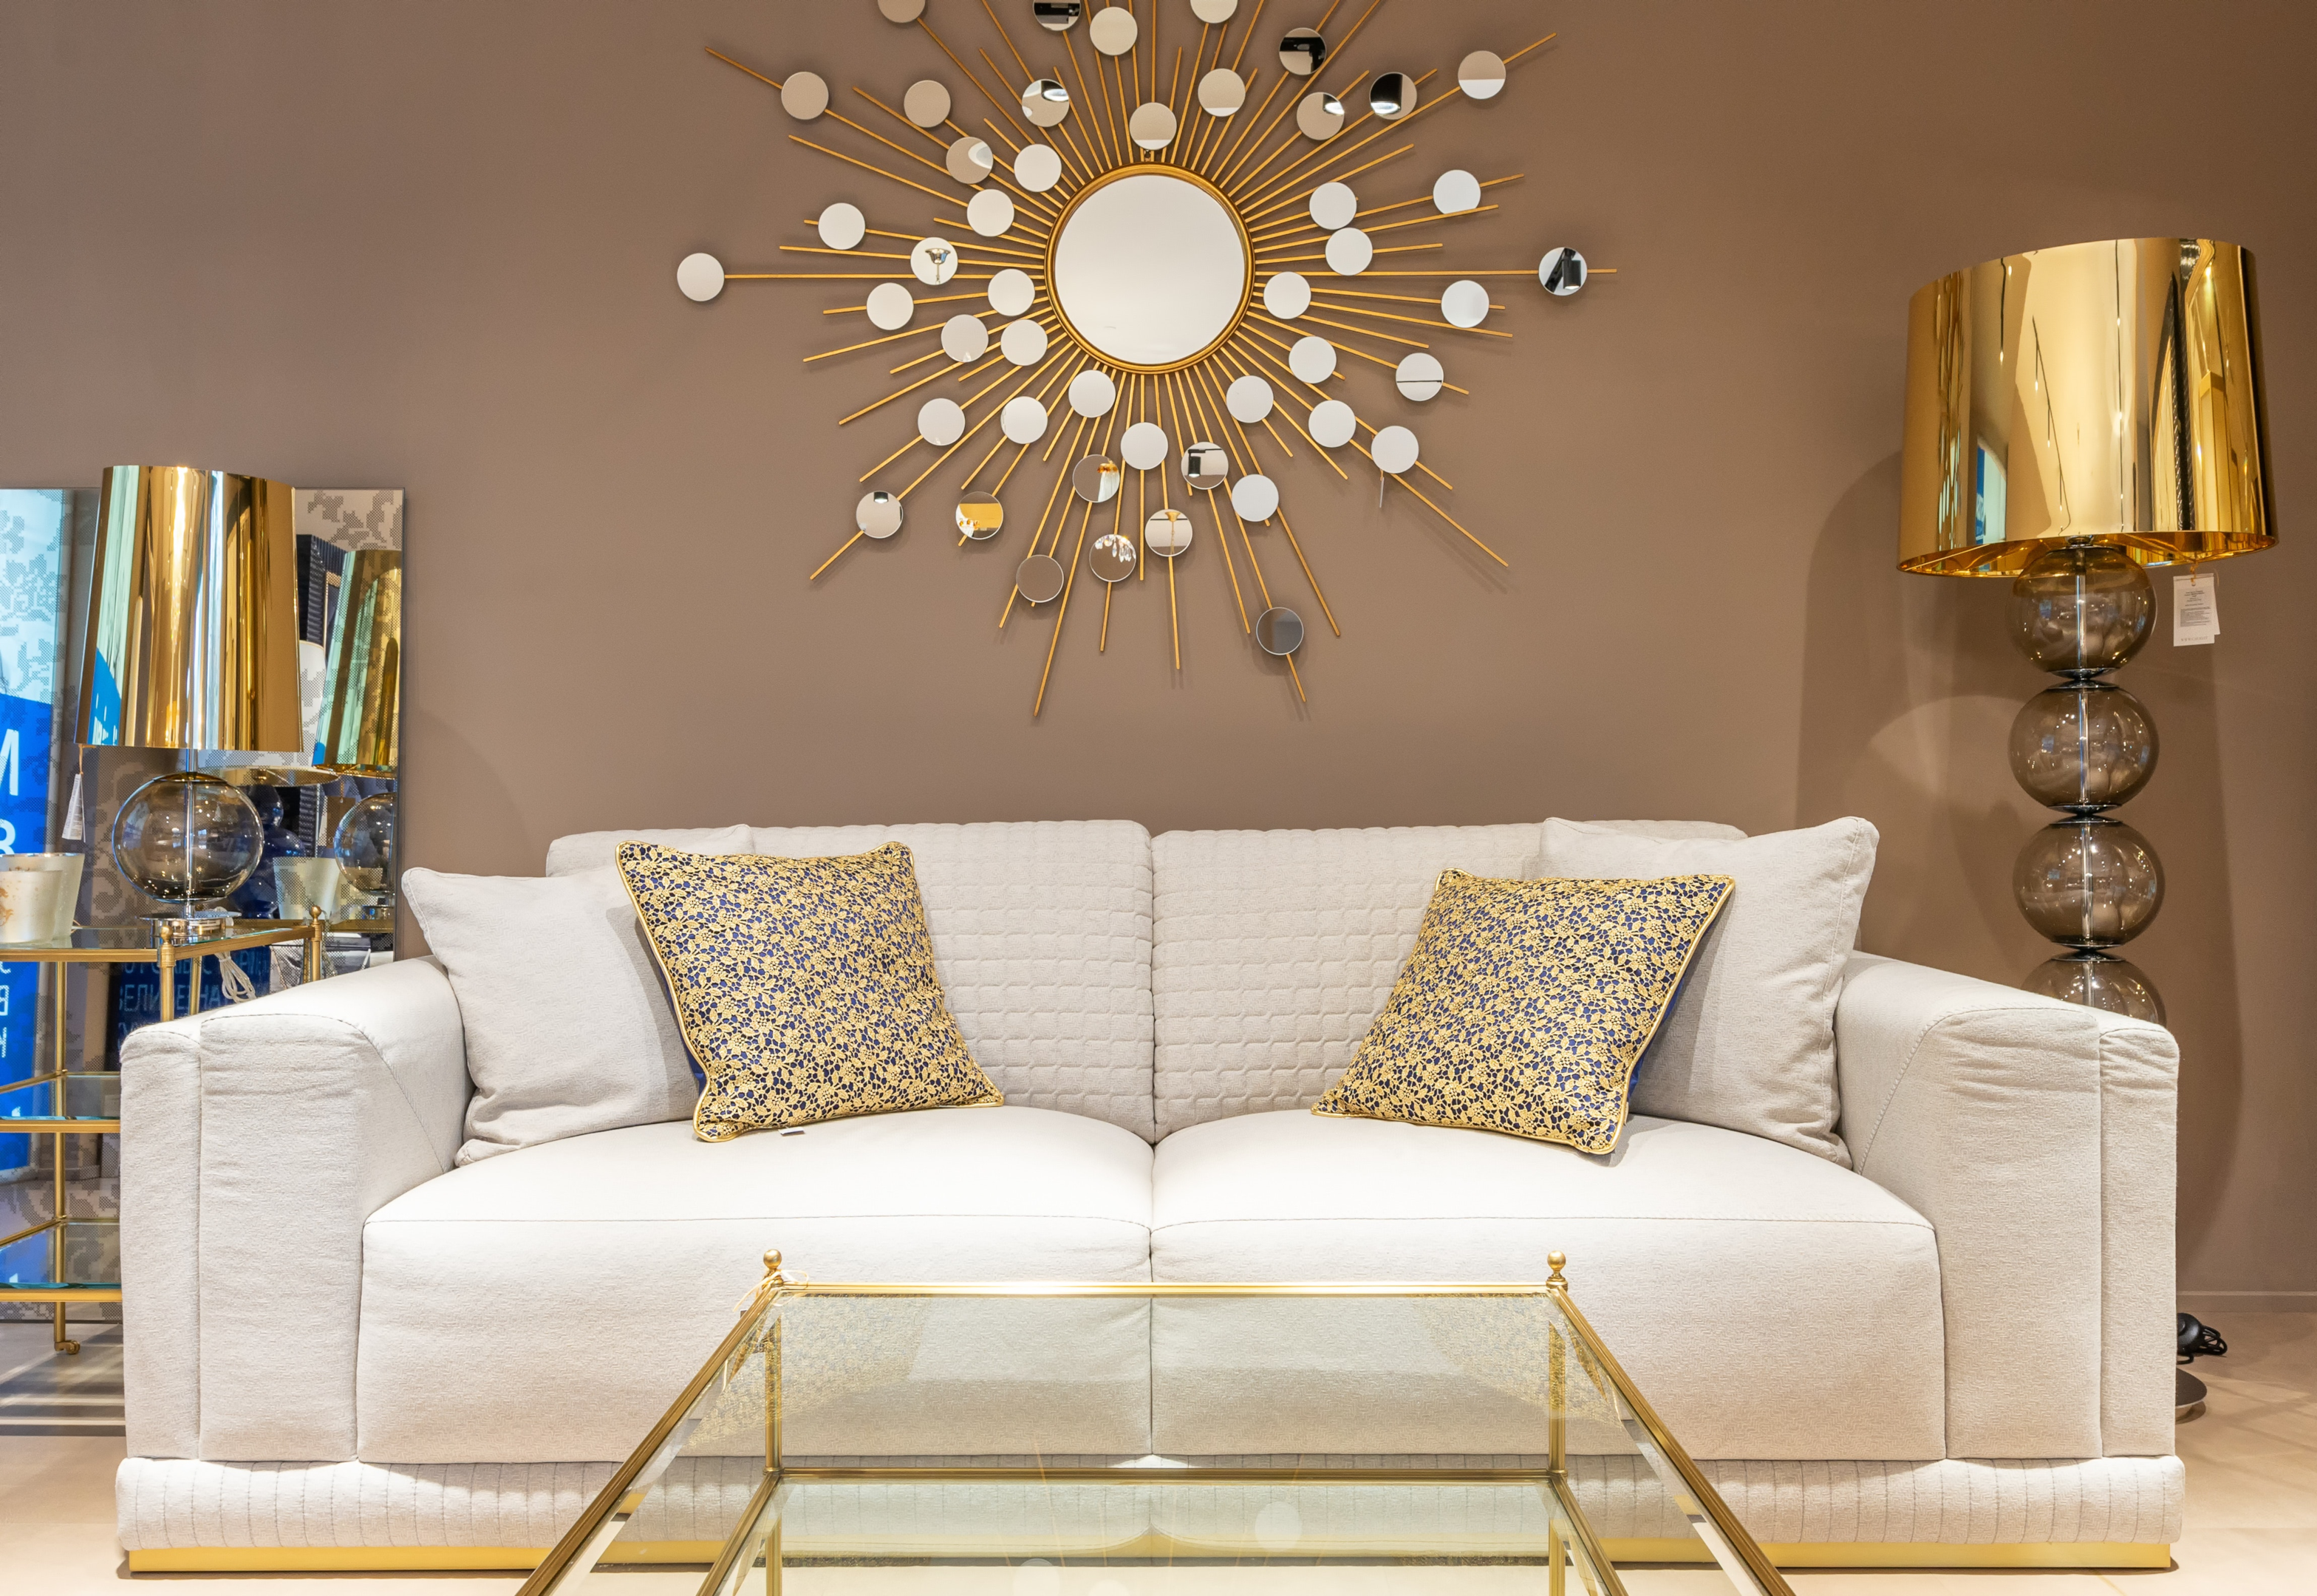 statement mirror on wall above white sofa